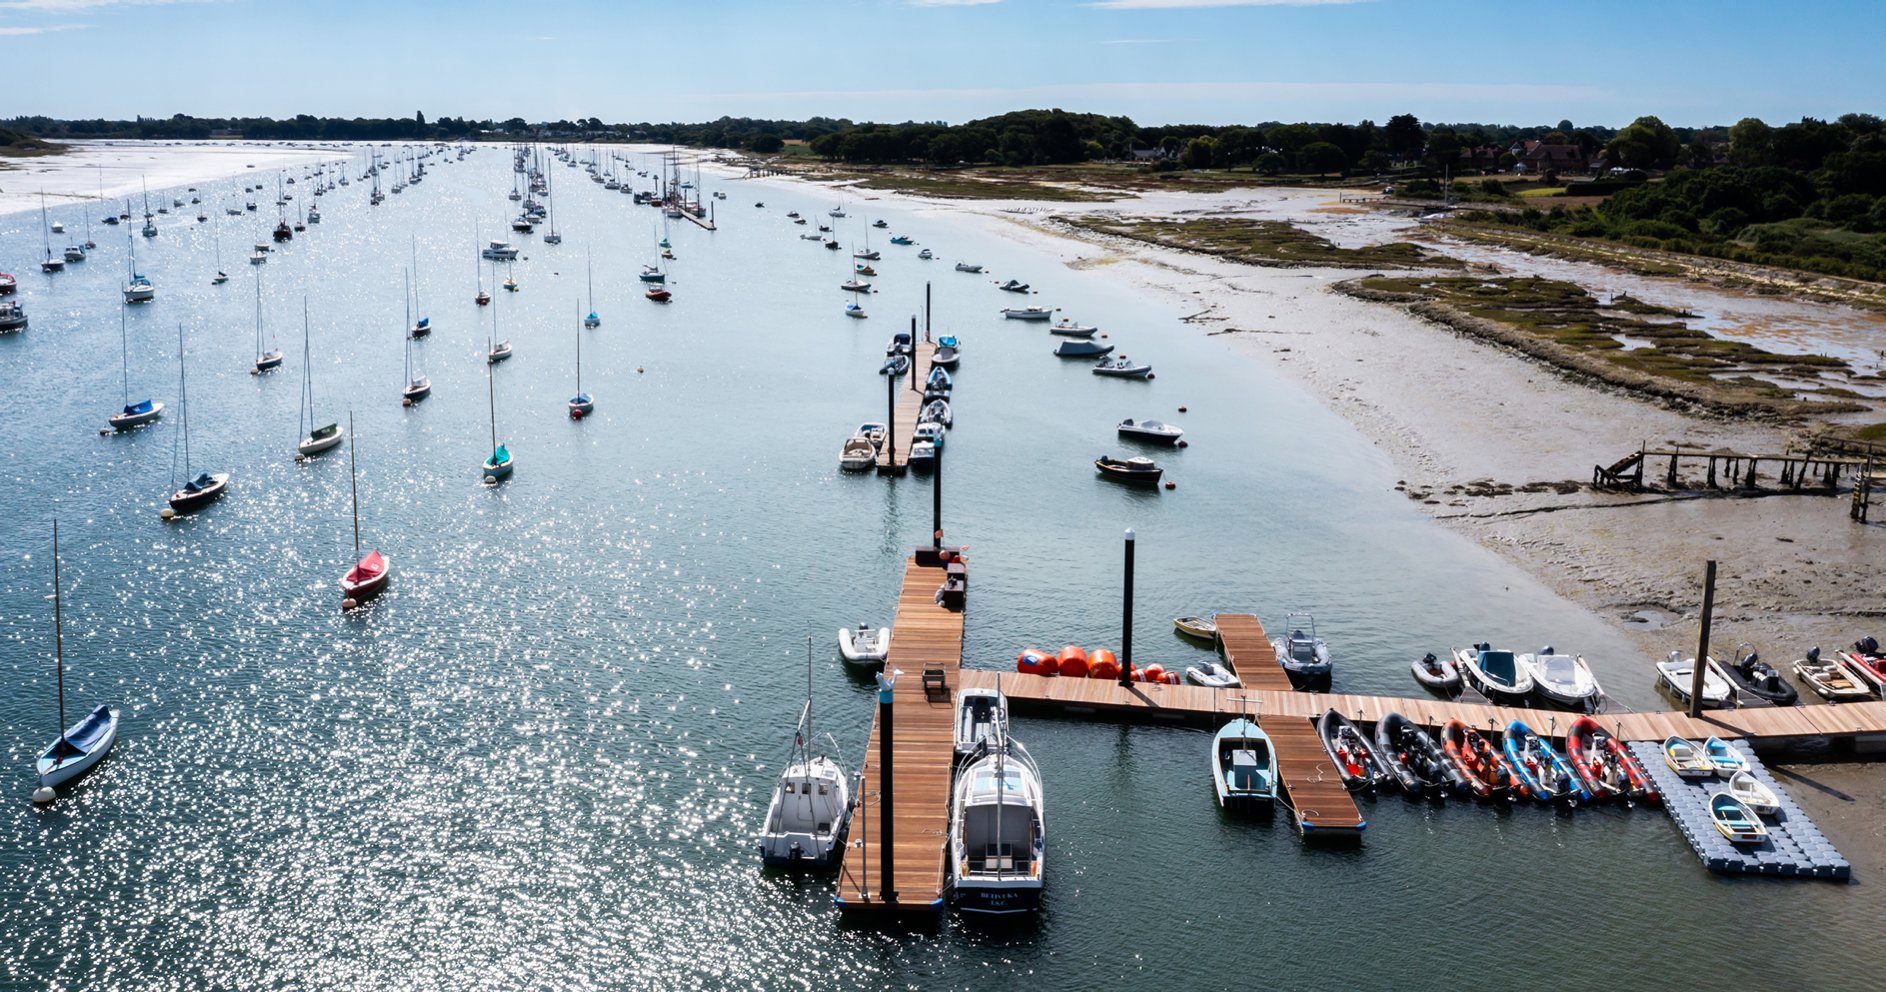 An aerial view of boats moored at Chichester Harbour